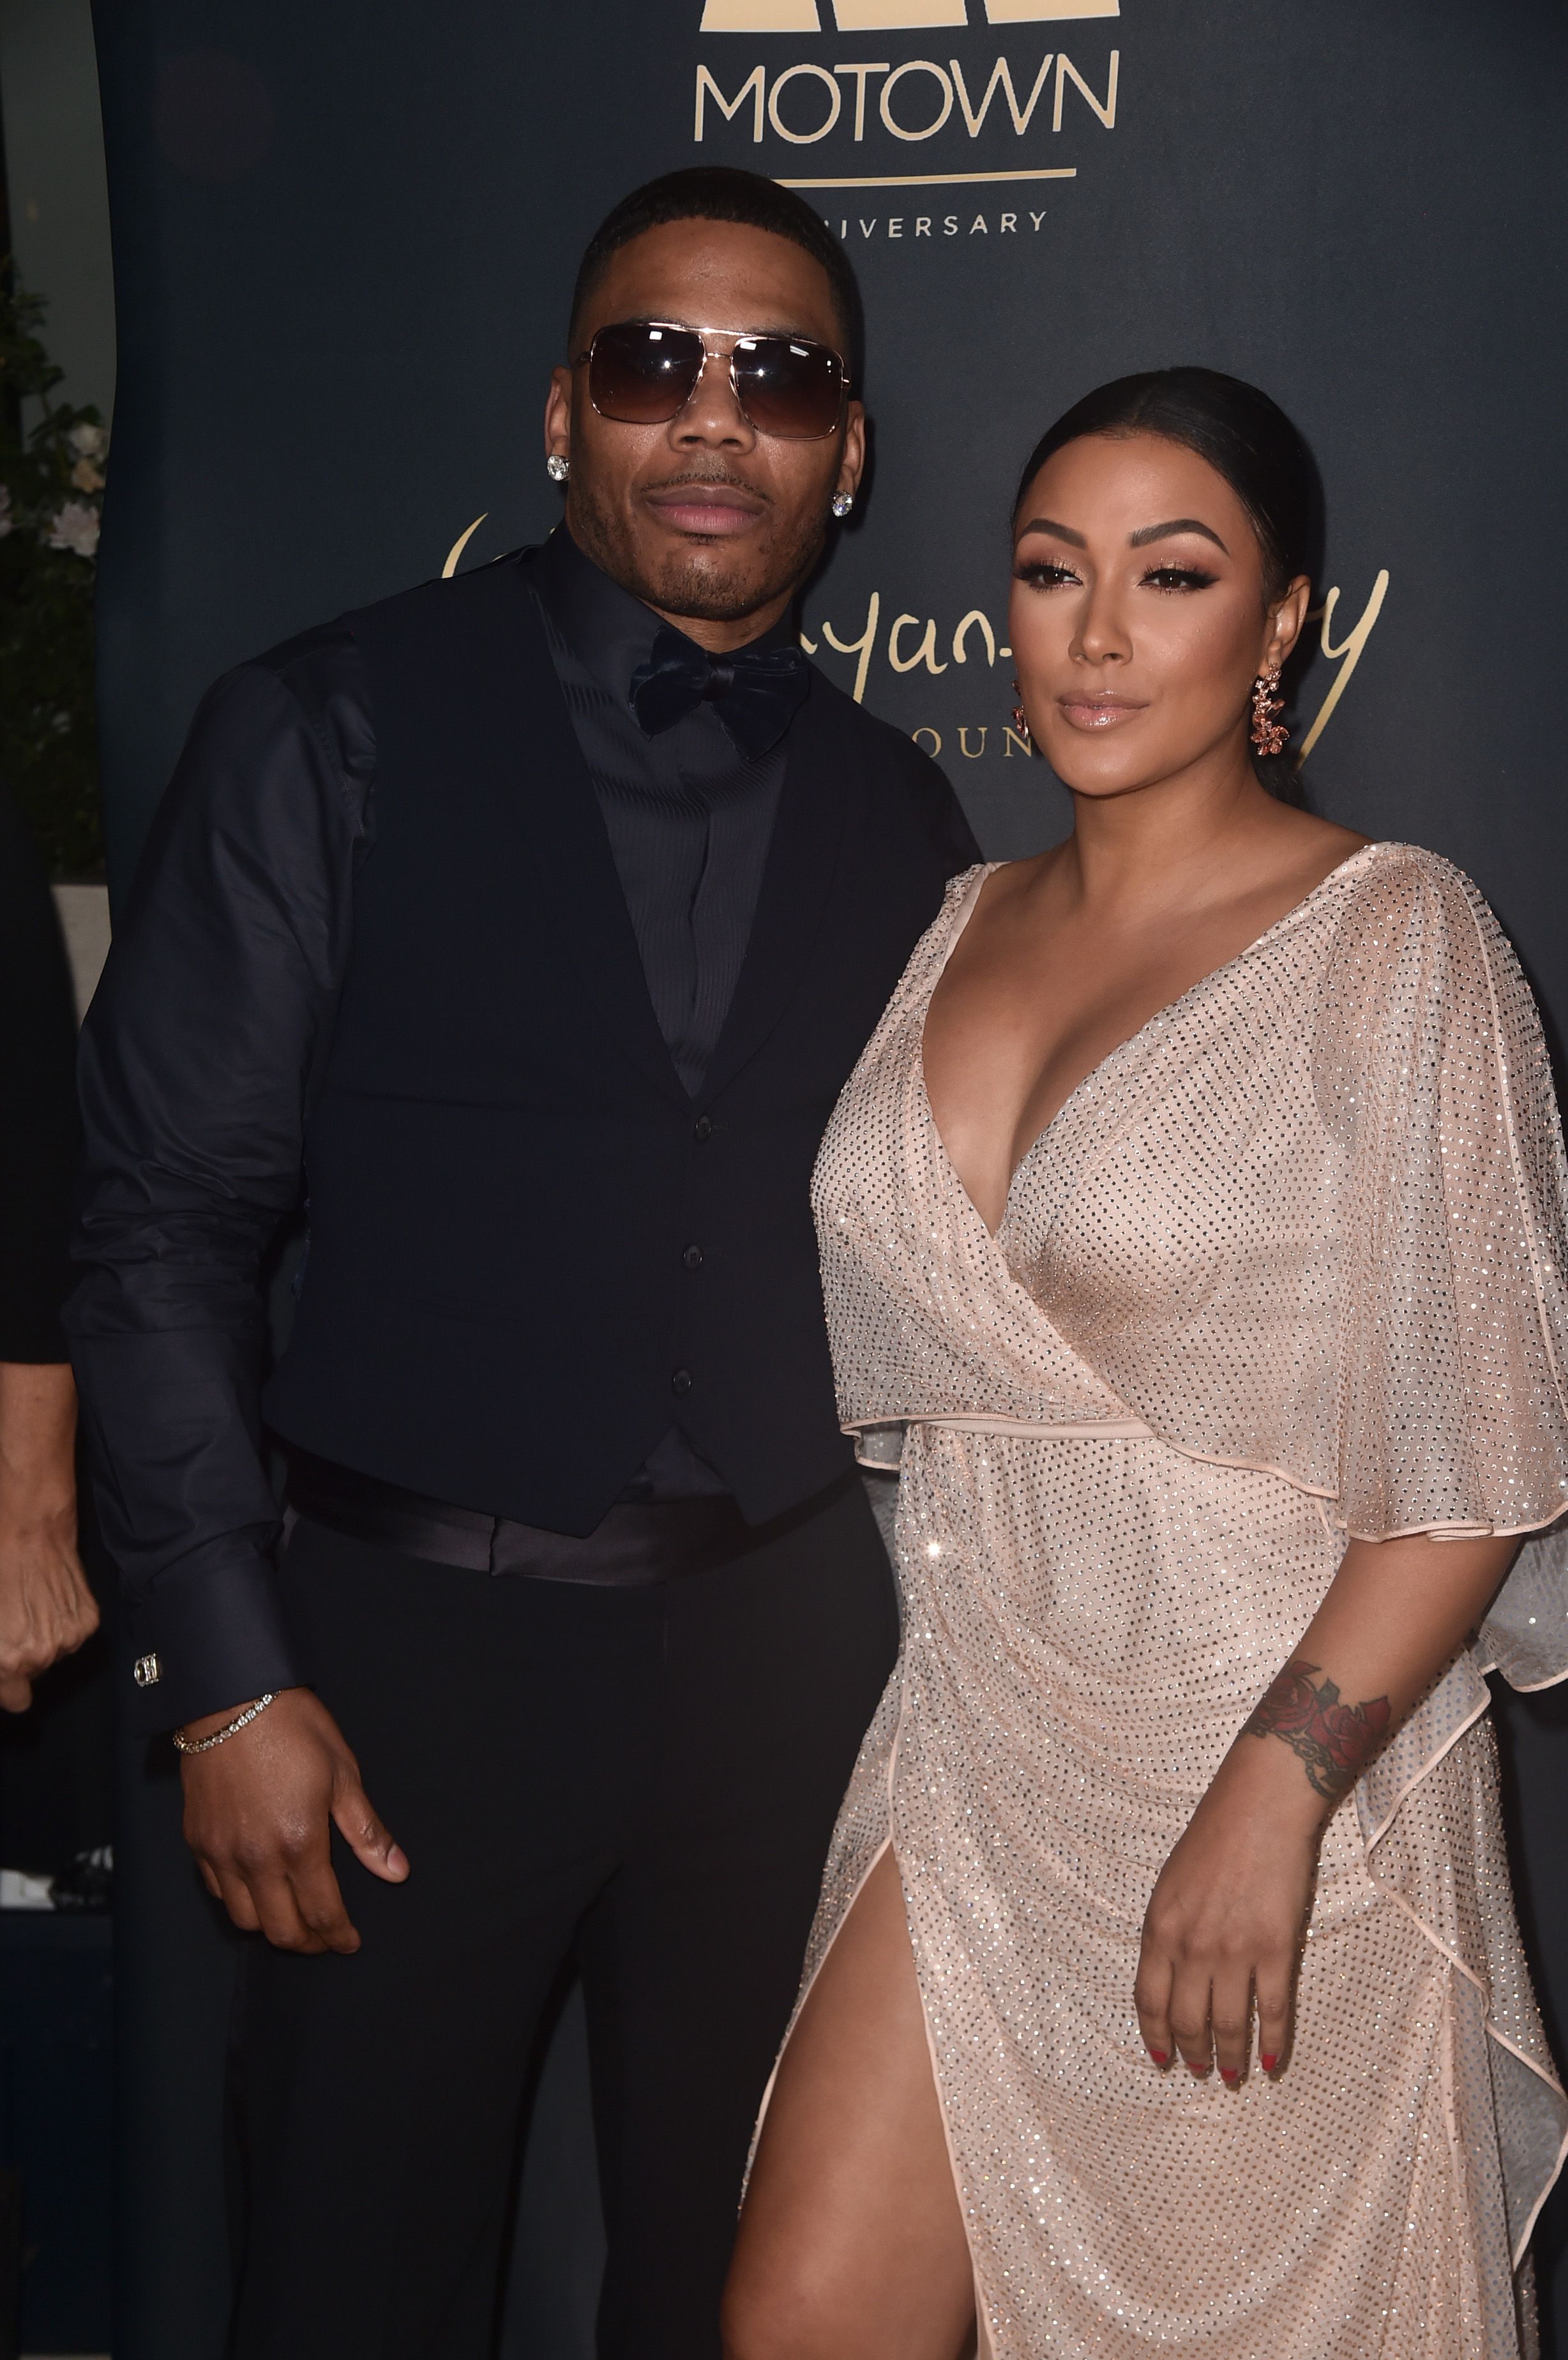 Nelly and Shantel Jackson at The Ryan Gordy Foundation's celebration of 60 Years Of Motown on November 11, 2019. | Photo: Getty Images